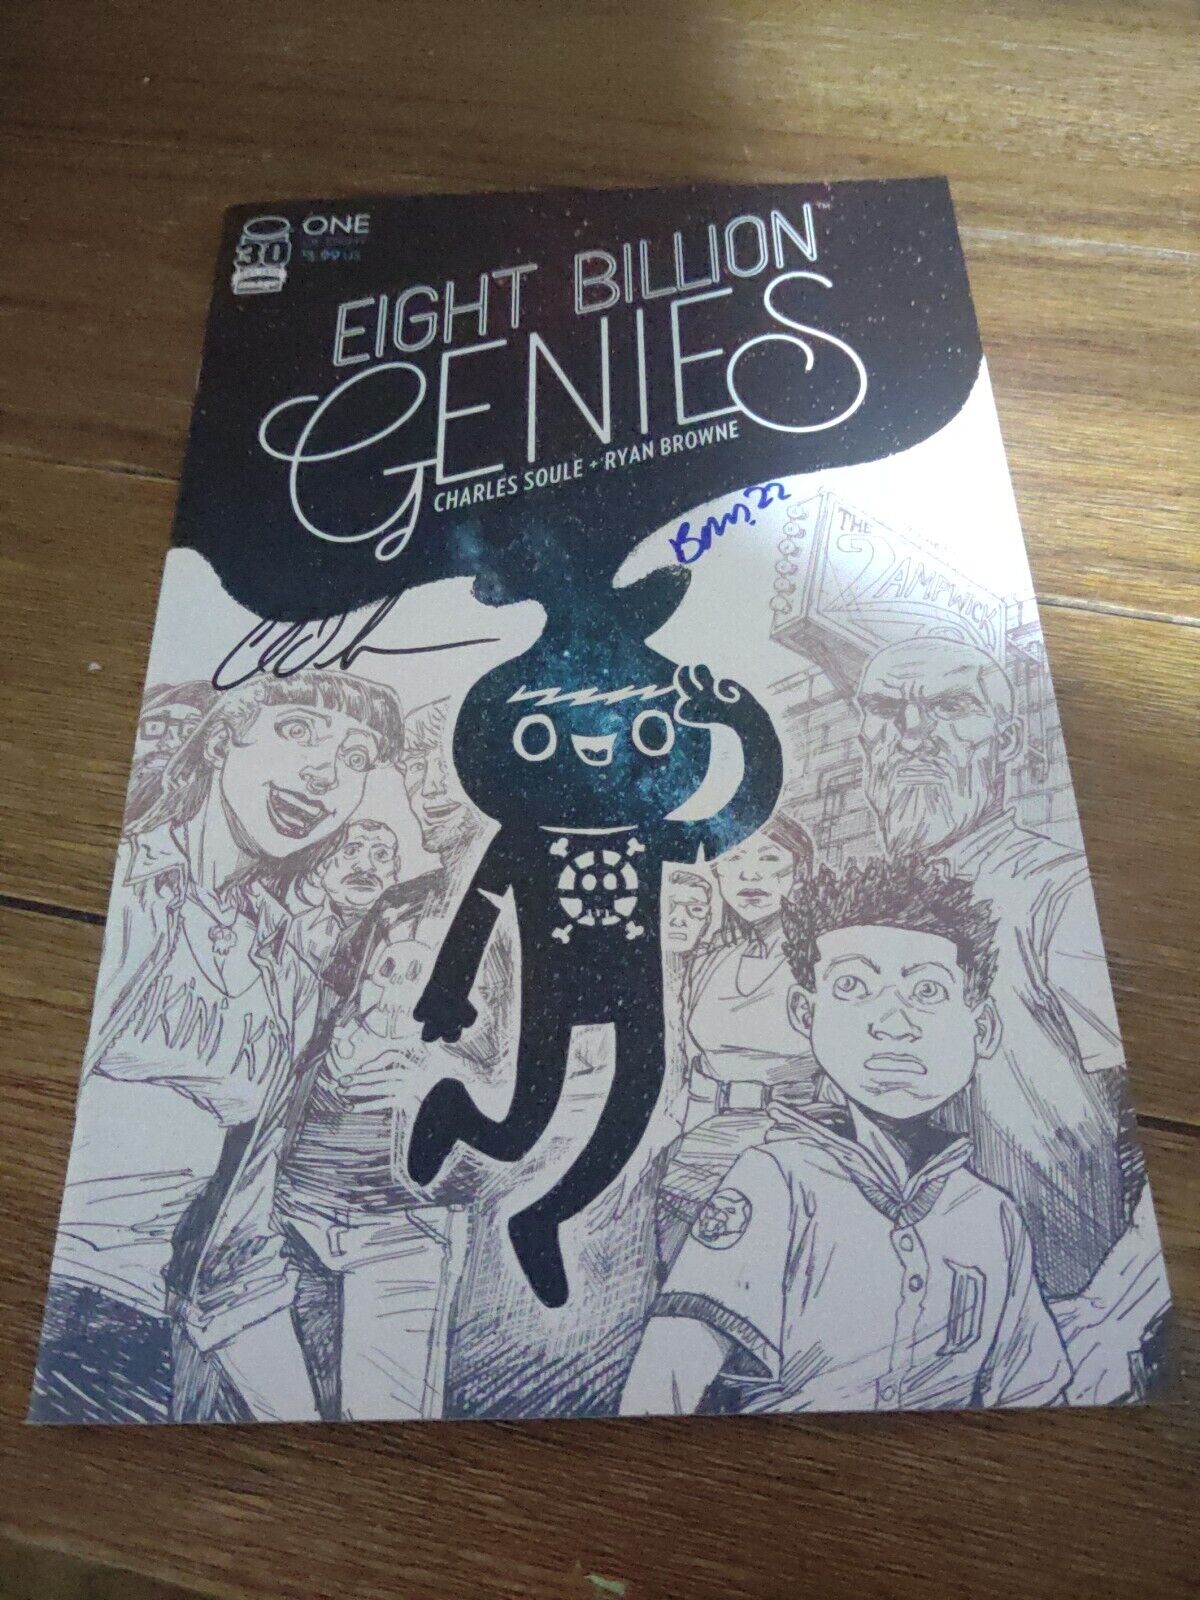 EIGHT BILLION GENIES #1 (2022) COVER A, NM Signed